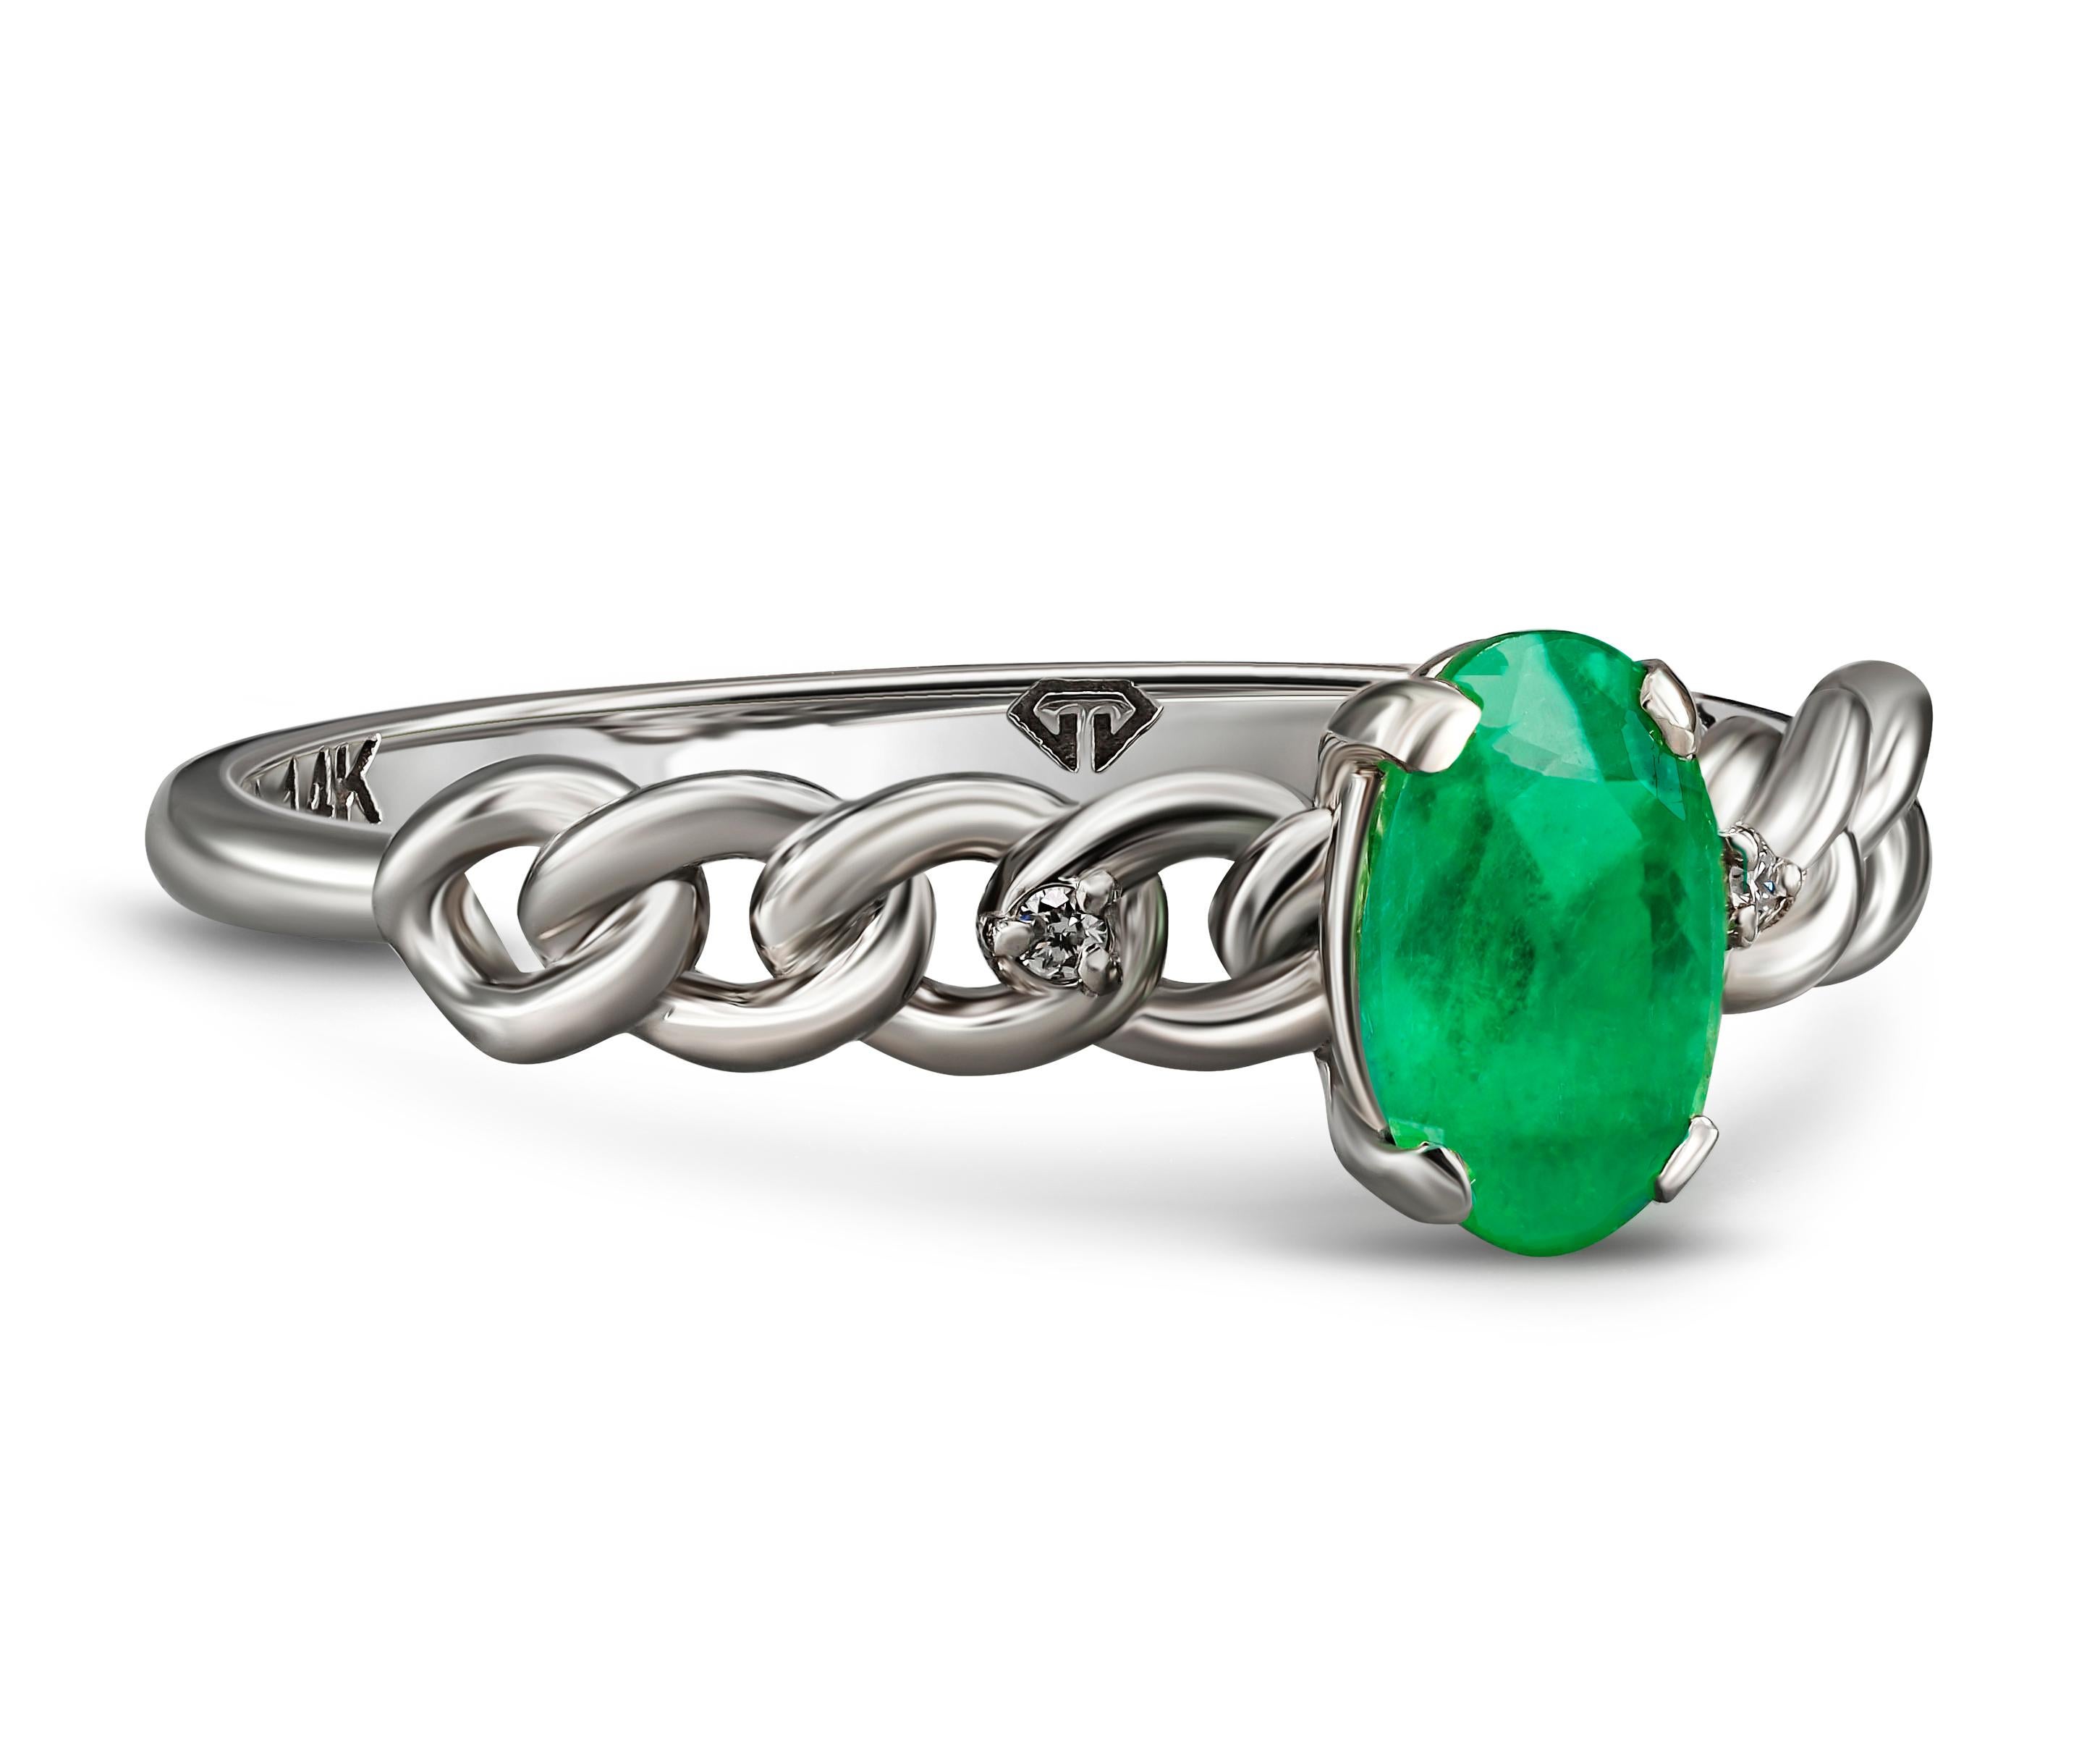 Oval emerald 14k gold ring. 
Gold Chain Ring. Minimalist ring. Emerald engagement ring. May Birthstone Ring. Stackable ring. Cuban Chain Ring.

Metal: 14k gold
Weight: 1.7 g. depends from size.

Set with emerald, color - green
Oval cut, aprx 0.70